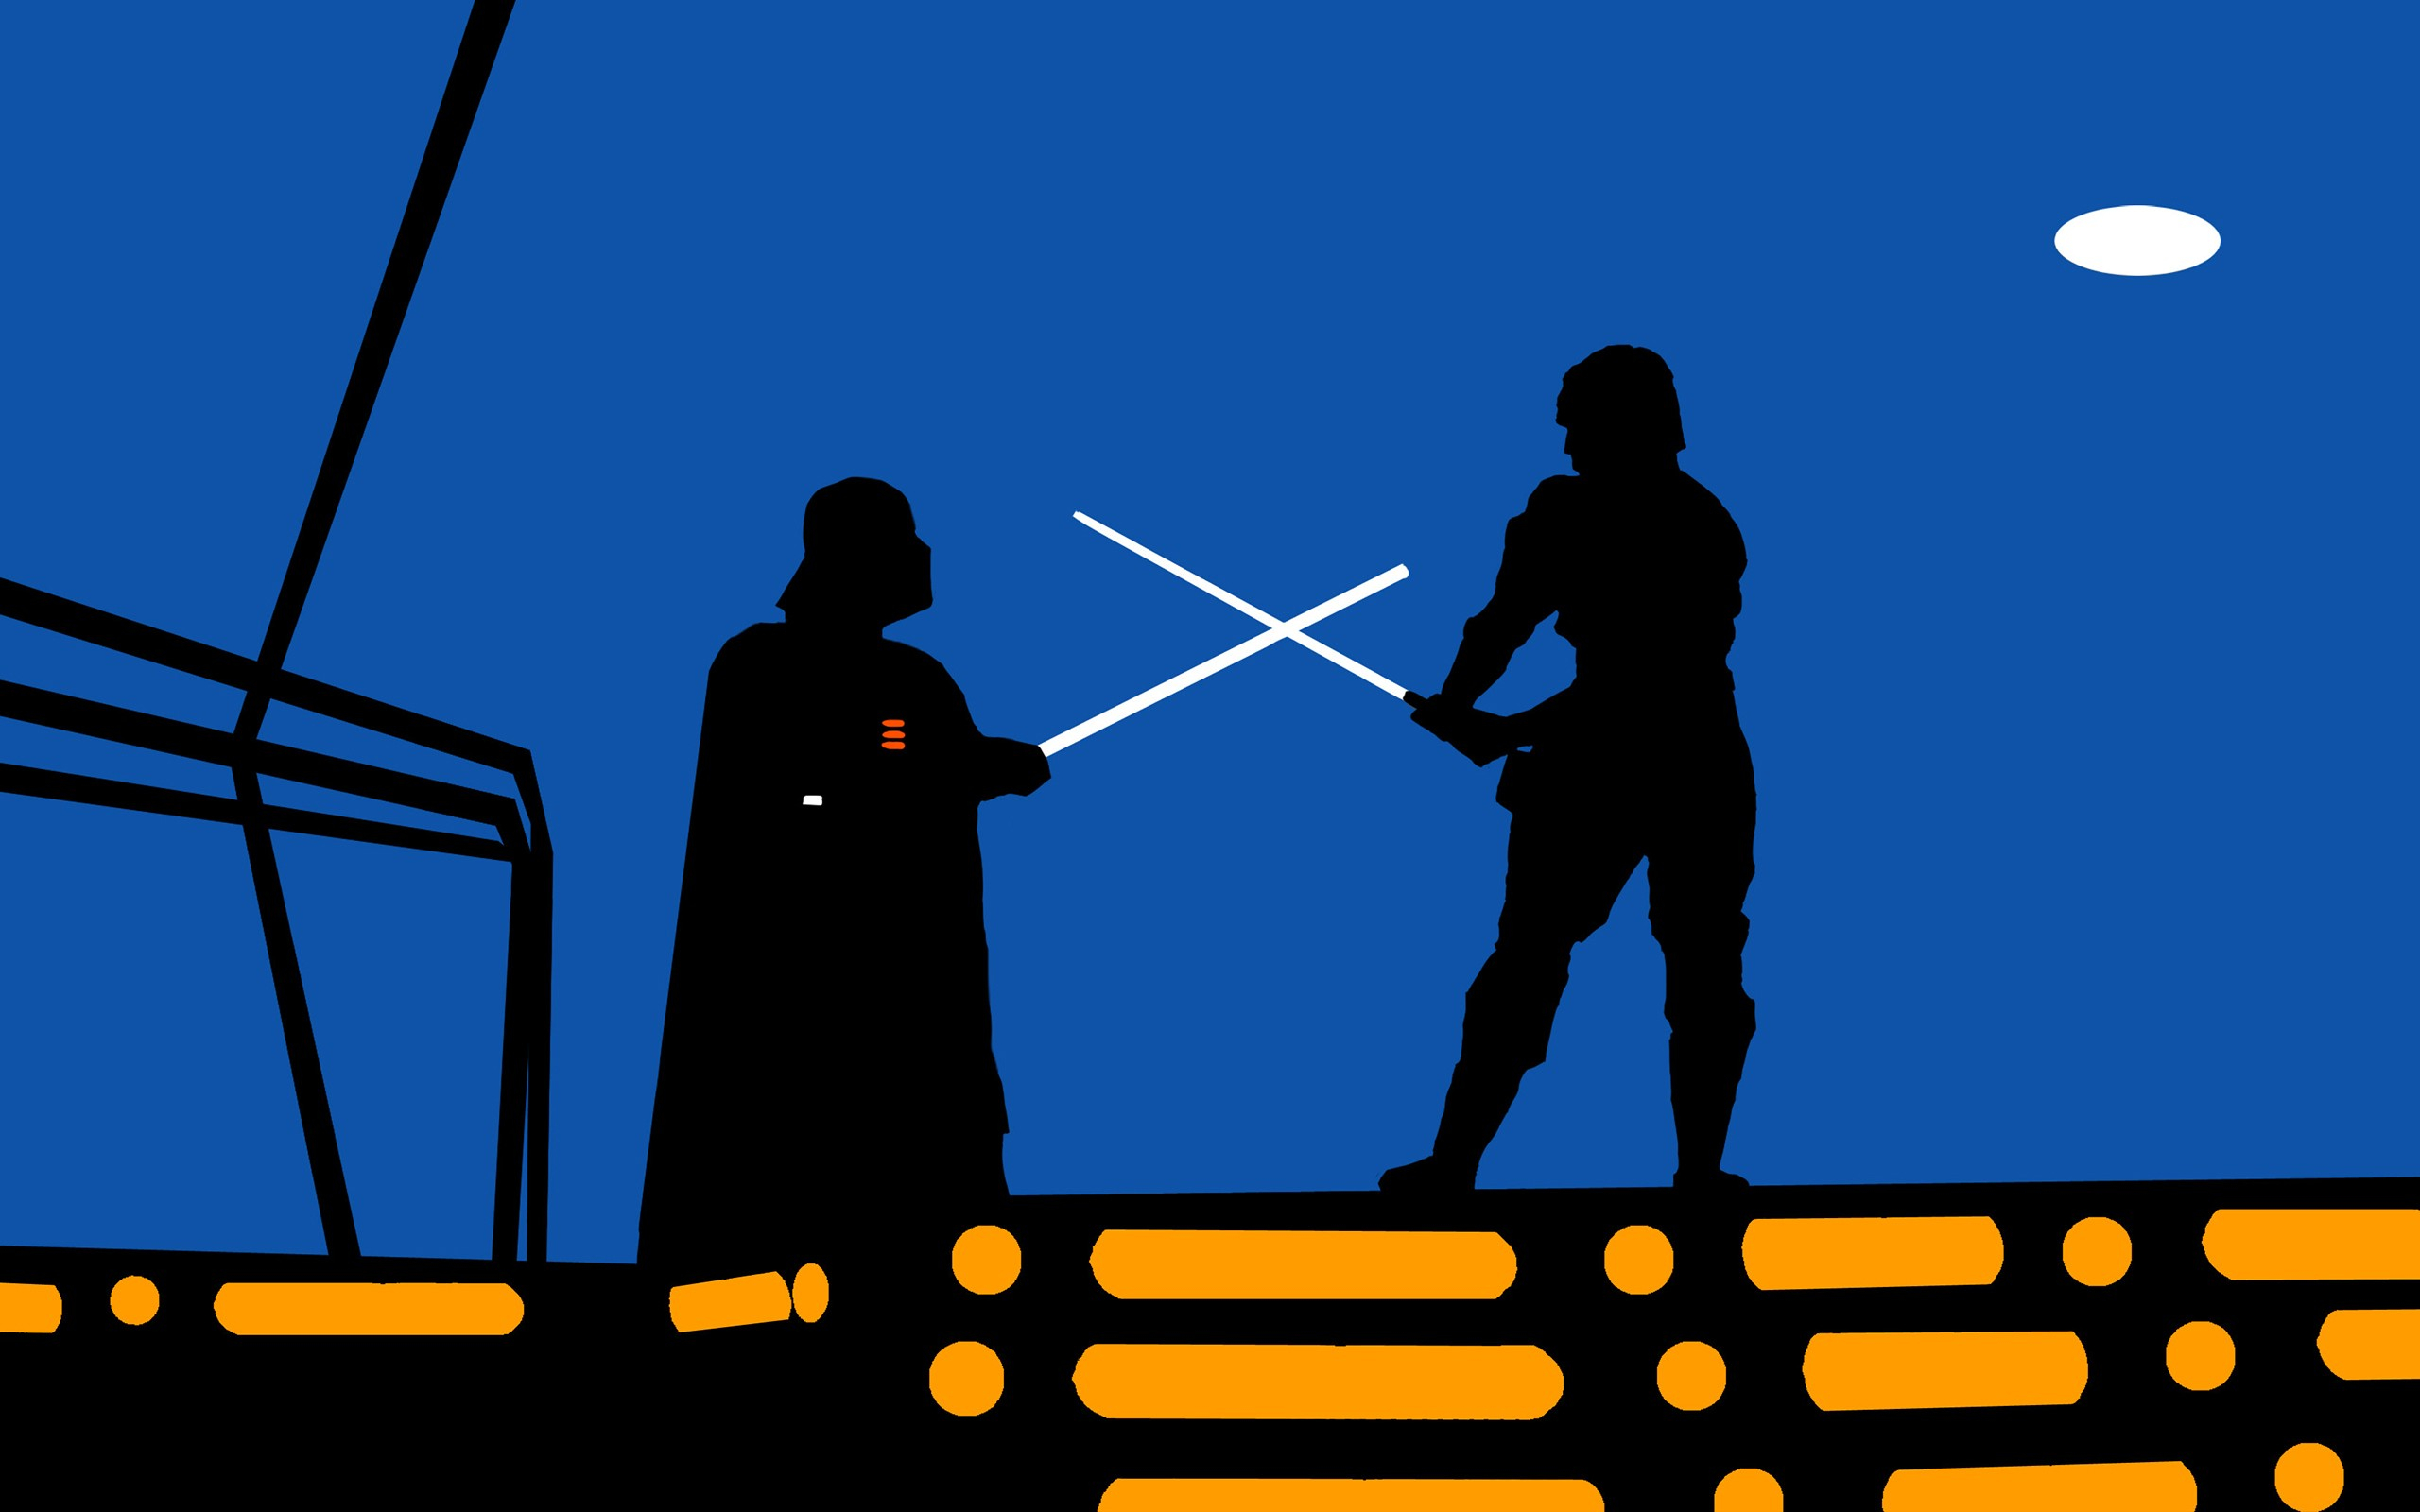 2560x1600 Lightsaber Duel Silhouette Wallpapers